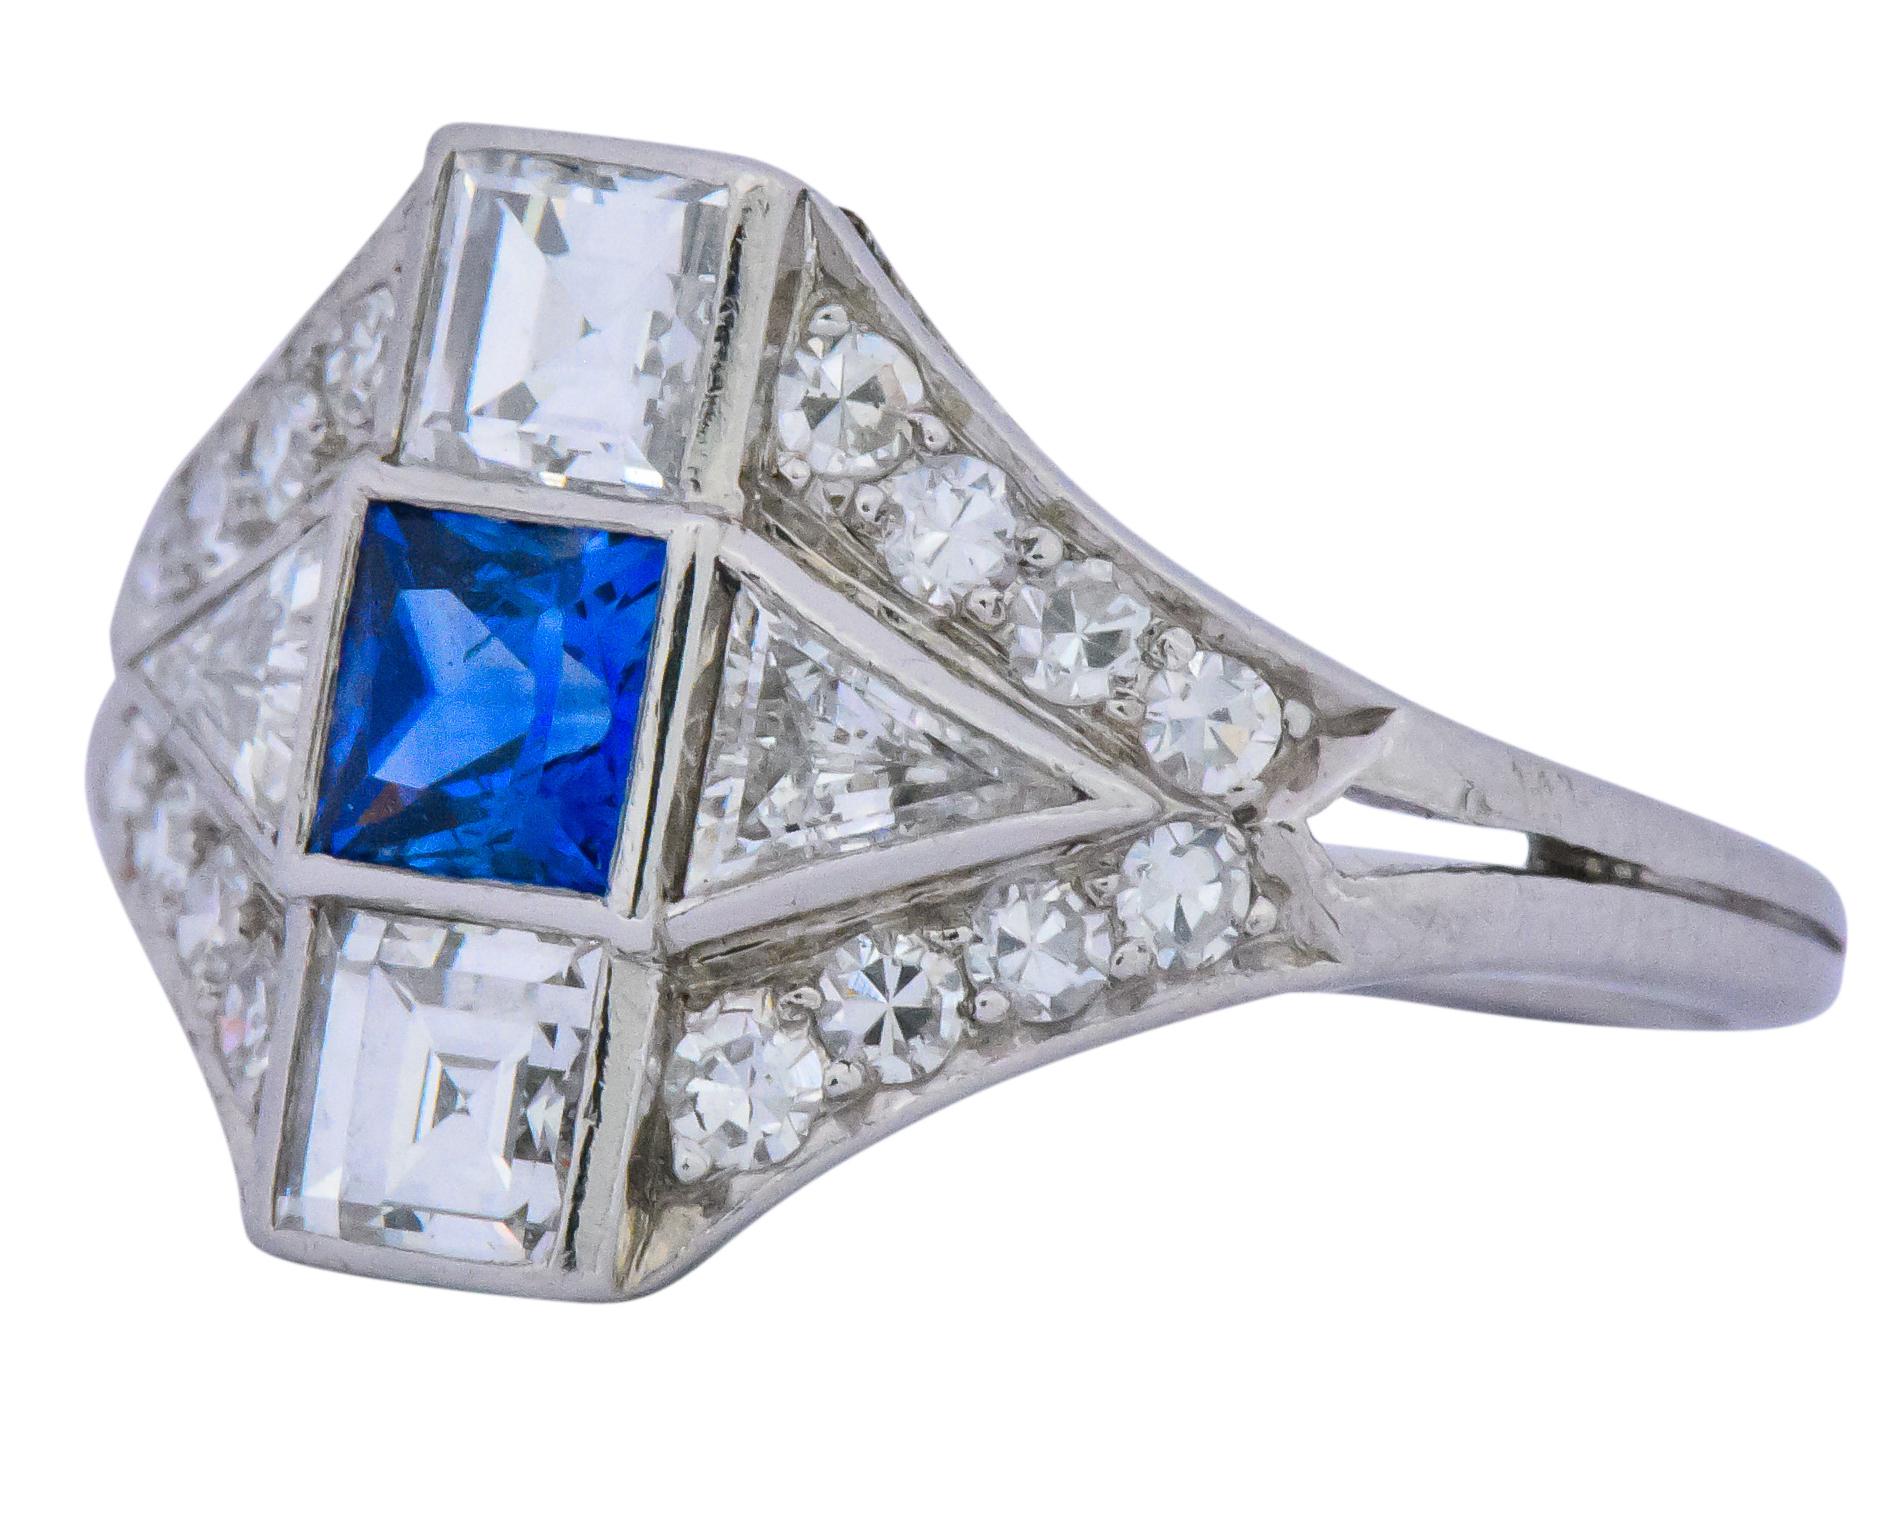  Centering a princess cut sapphire weighing approximately 0.50 carat, bright cornflower blue

Accented by square step, triangular and single cut diamonds, weighing approximately 1.20 carats total, GHI color and VS to SI clarity 

Bold yet balanced